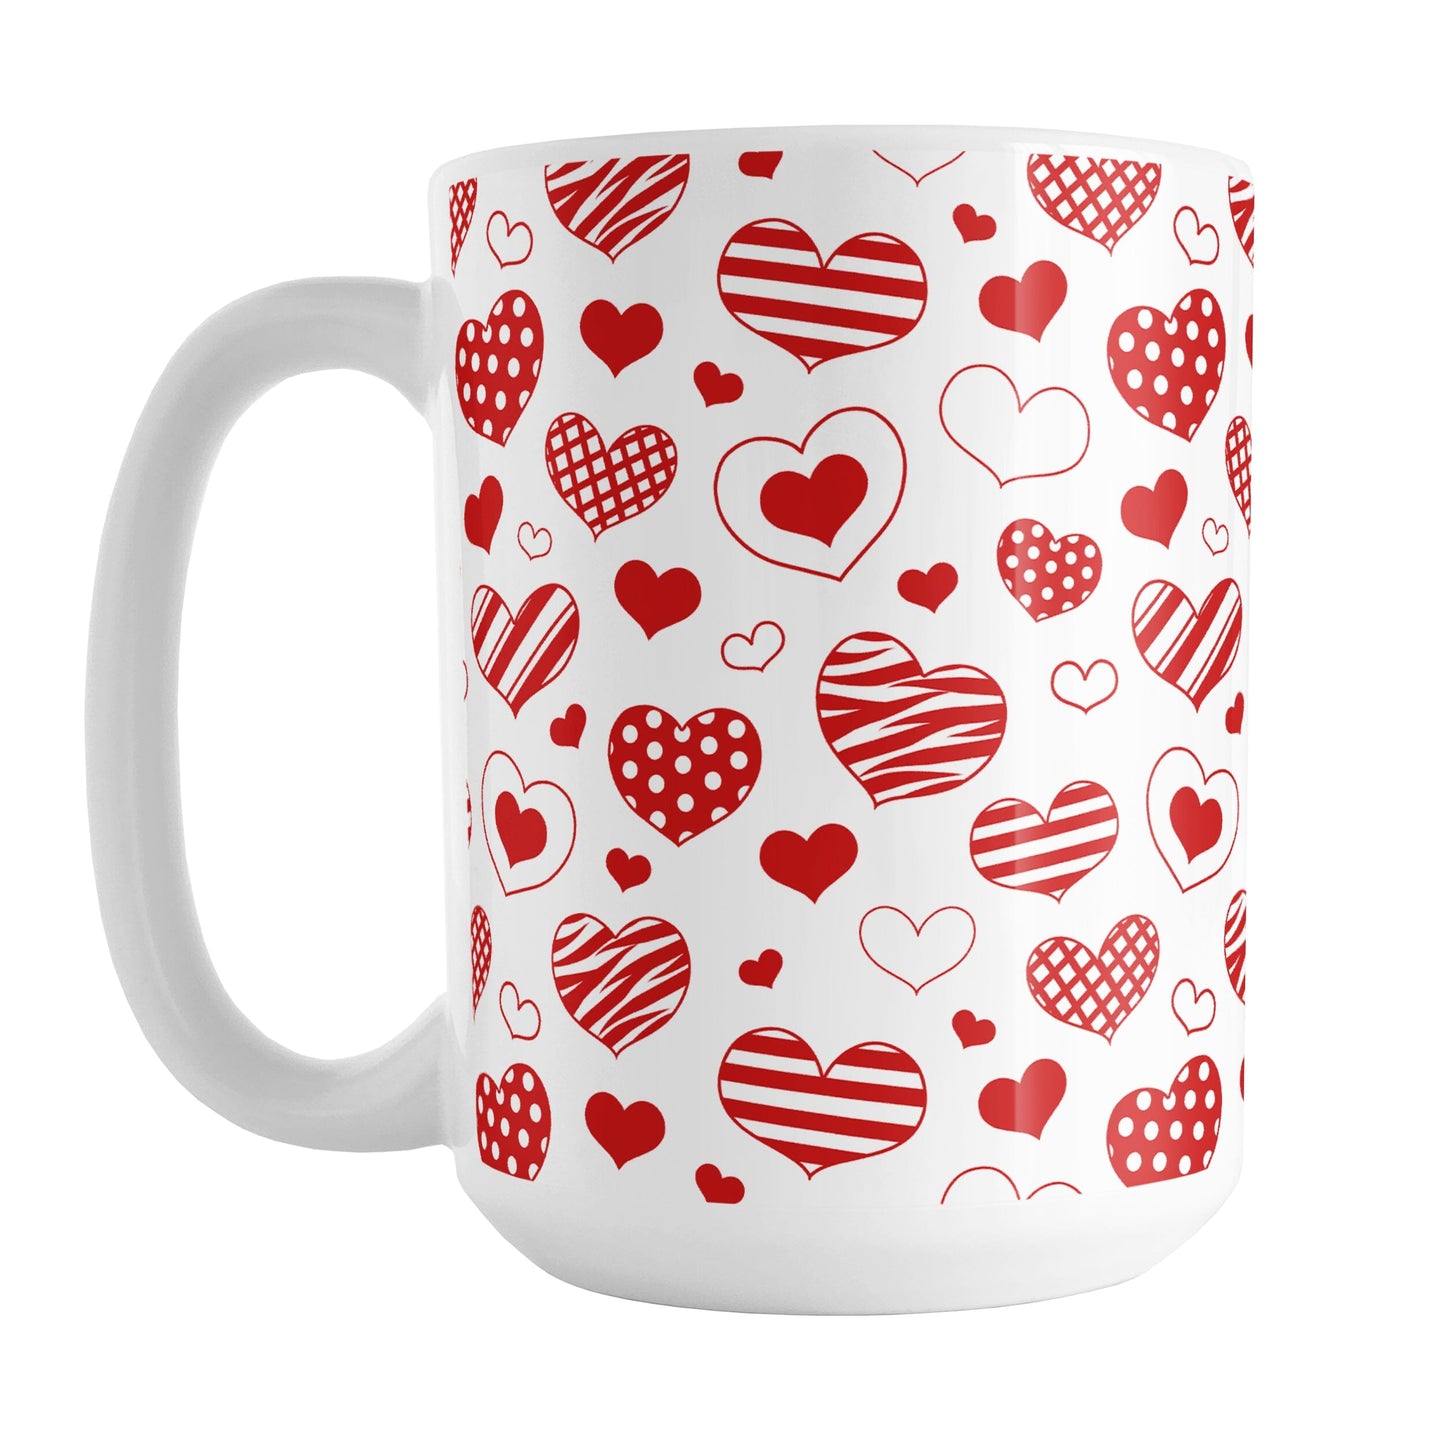 Red Heart Doodles Mug (15oz) at Amy's Coffee Mugs. A ceramic coffee mug designed with hand-drawn red heart doodles in a pattern that wraps around the mug up to the handle. This cute hearts pattern is perfect for Valentine's Day or for anyone who loves hearts and young-at-heart drawings. 